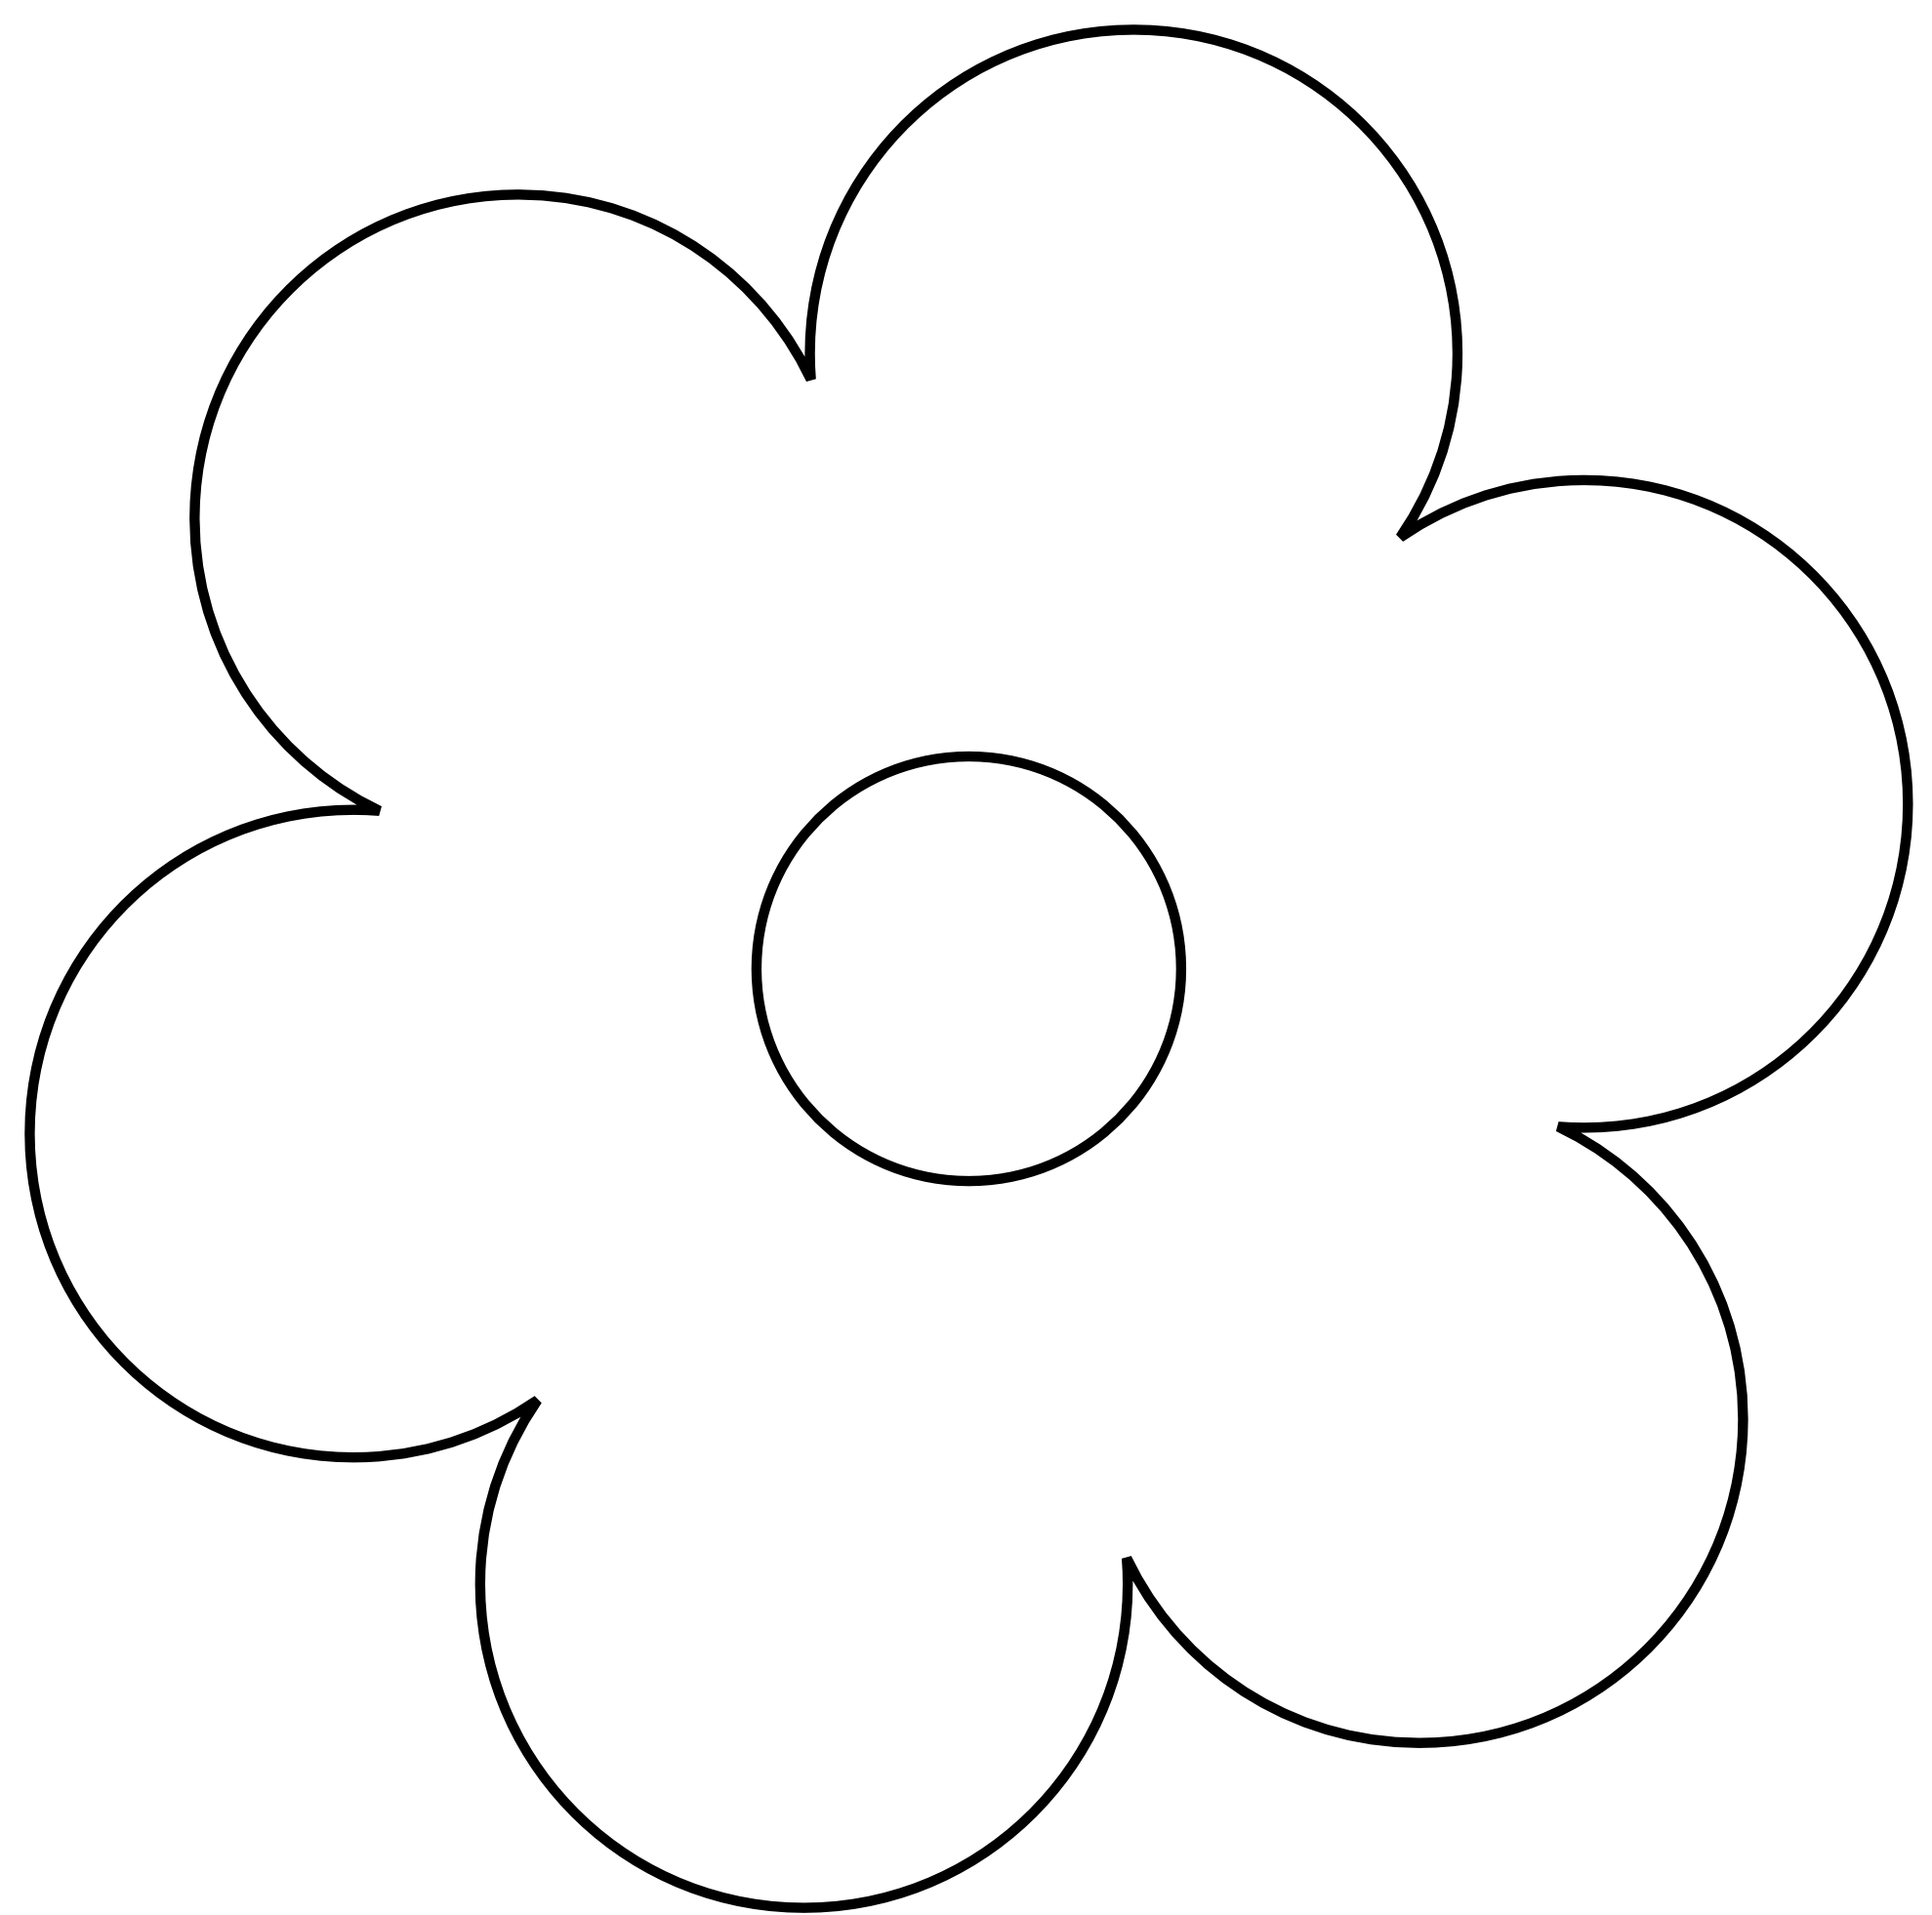 Free Black And White Flower Images, Download Free Clip Art